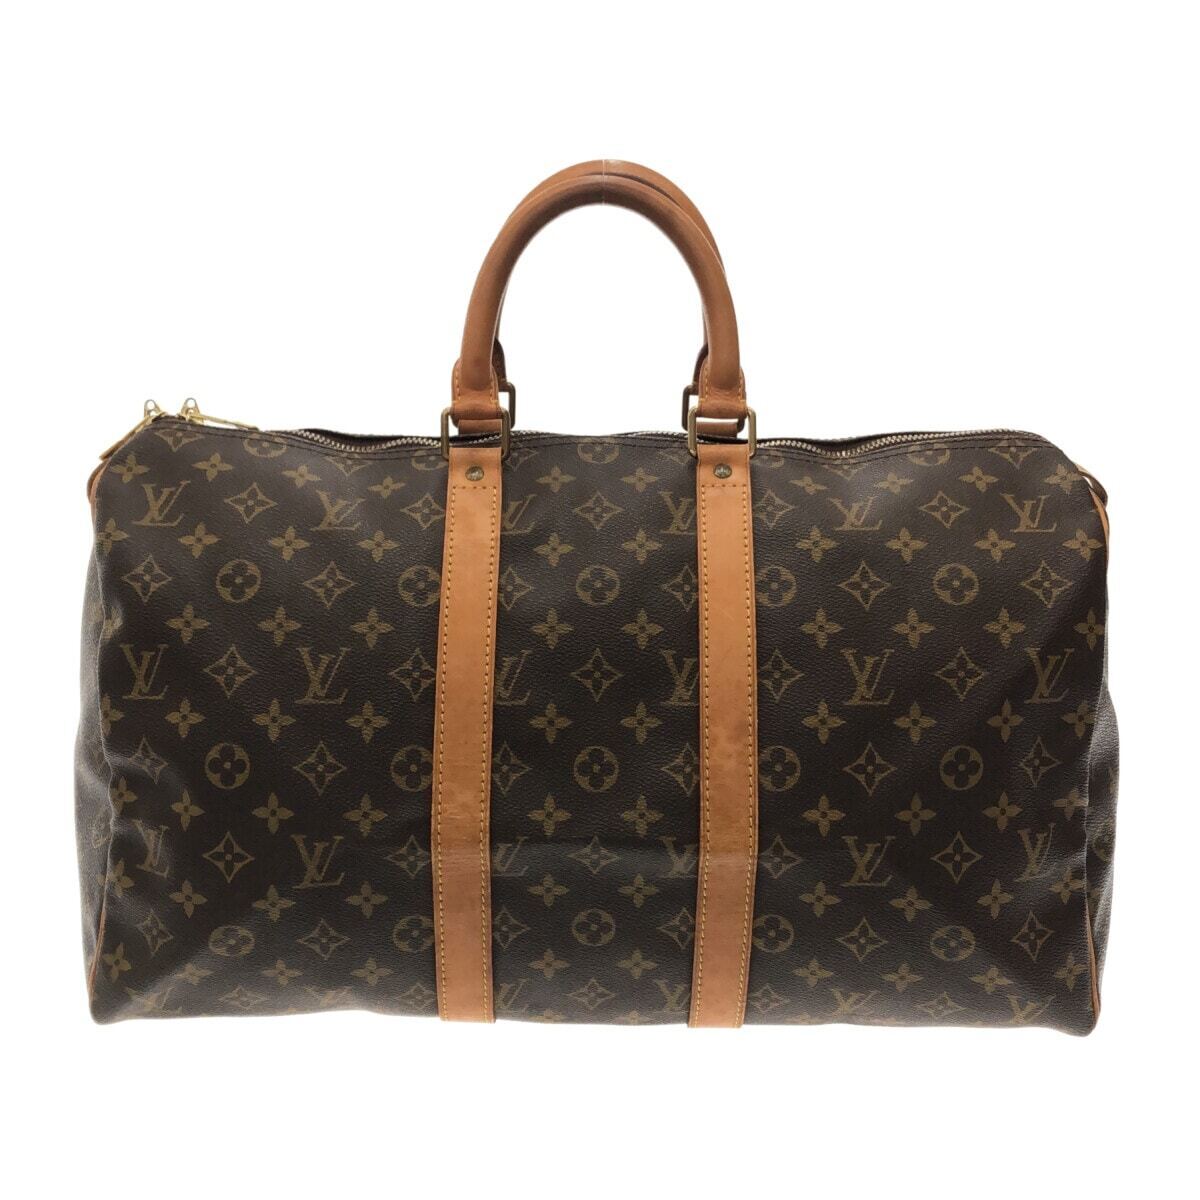 Louis Vuitton Trunks & Bags Wallet - One Savvy Design Luxury